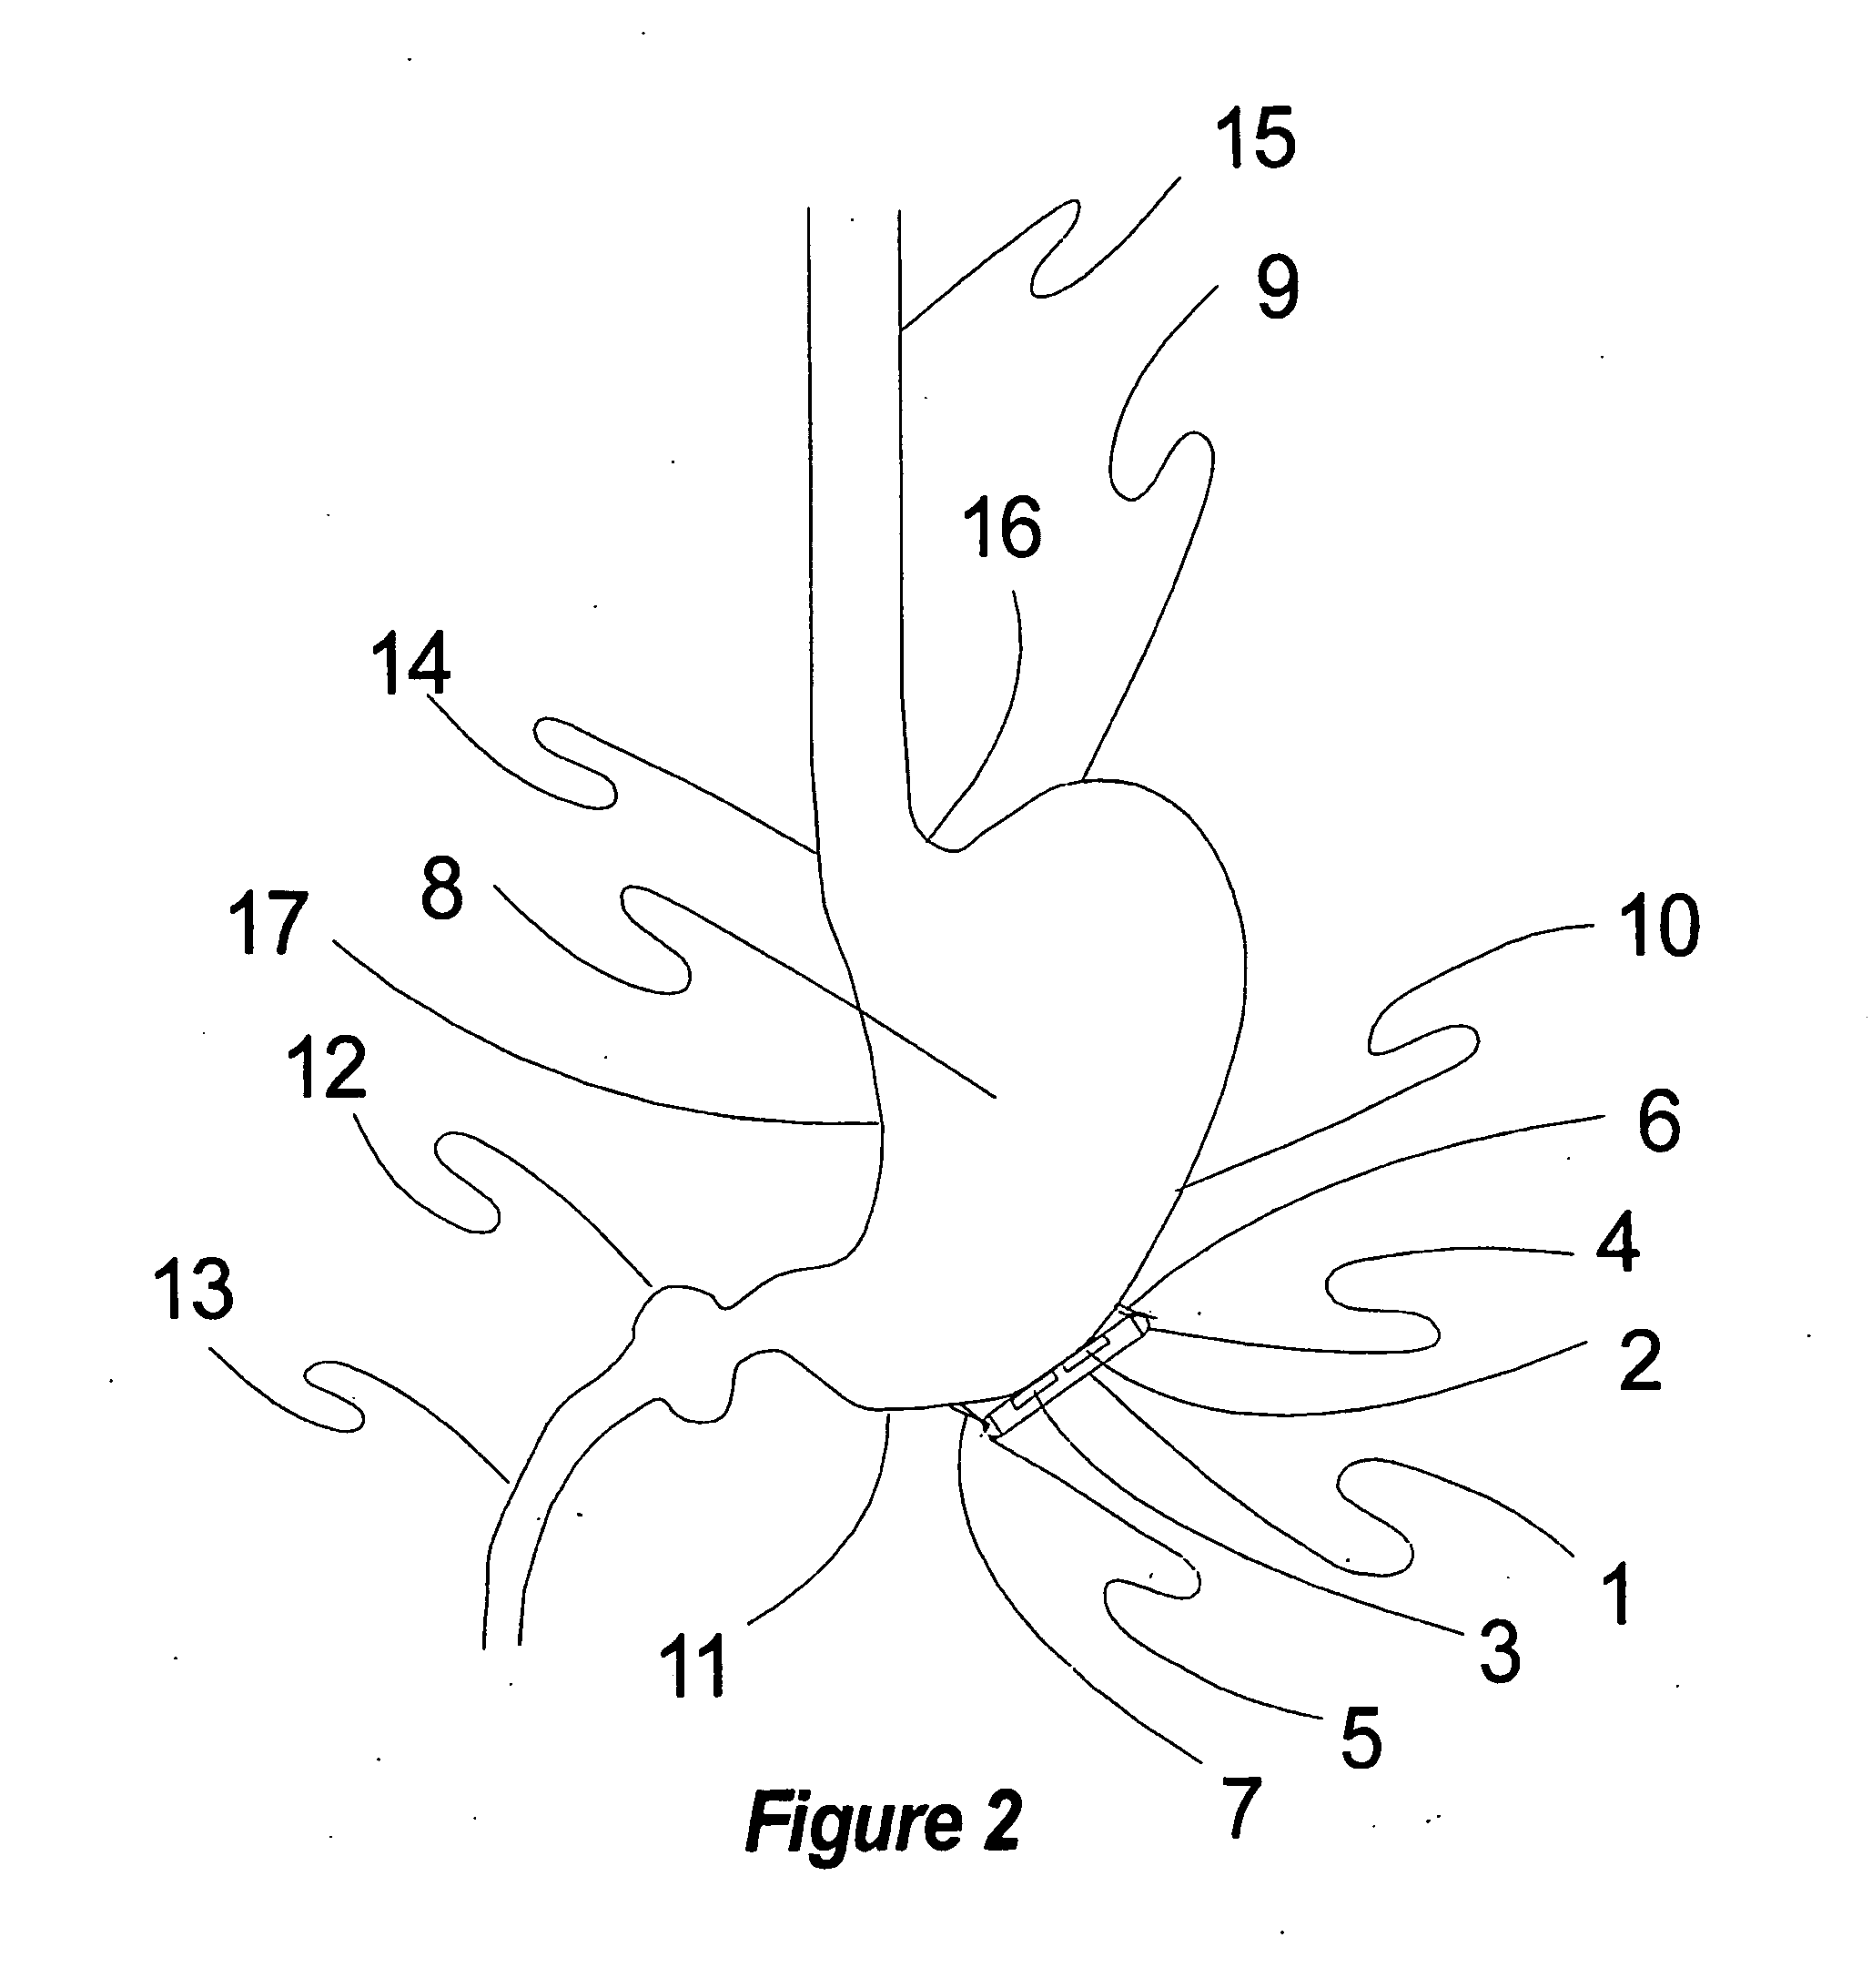 Method, apparatus, surgical technique, and stimulation parameters for autonomic neuromodulation for the treatment of obesity